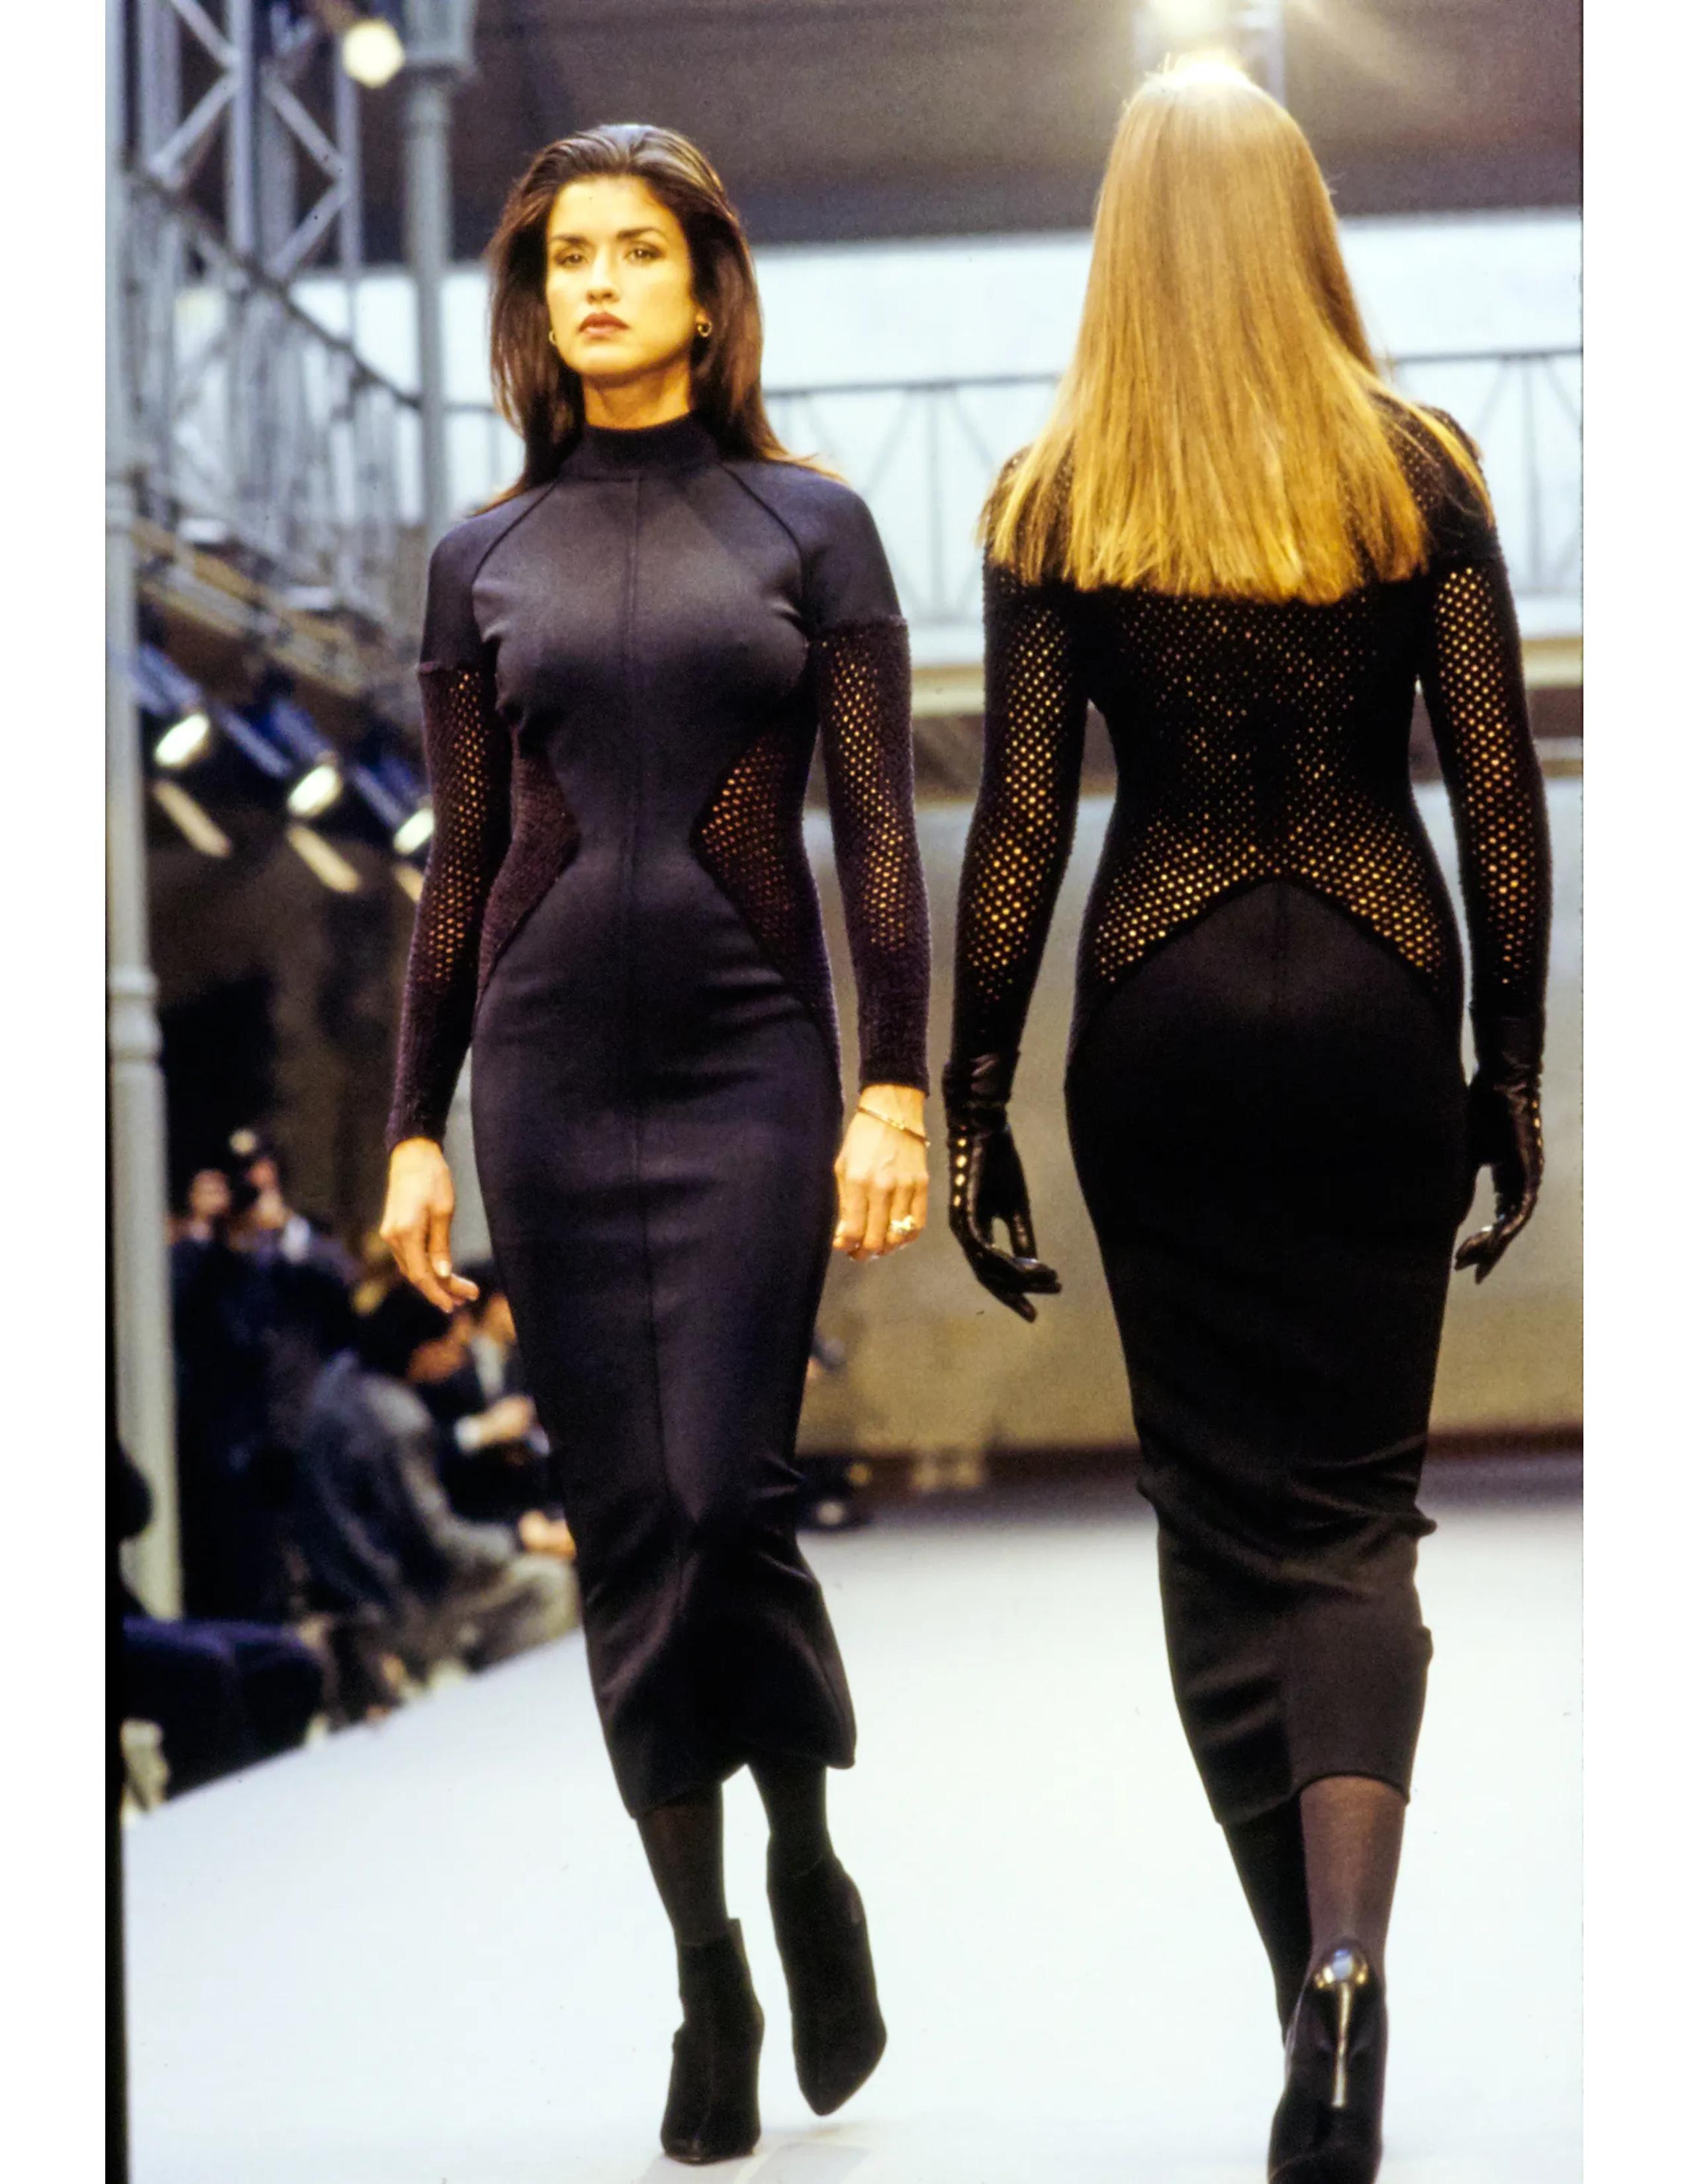 1989 AZZEDINE ALAIA black RUNWAY dress with sheer chenille panels For Sale 6